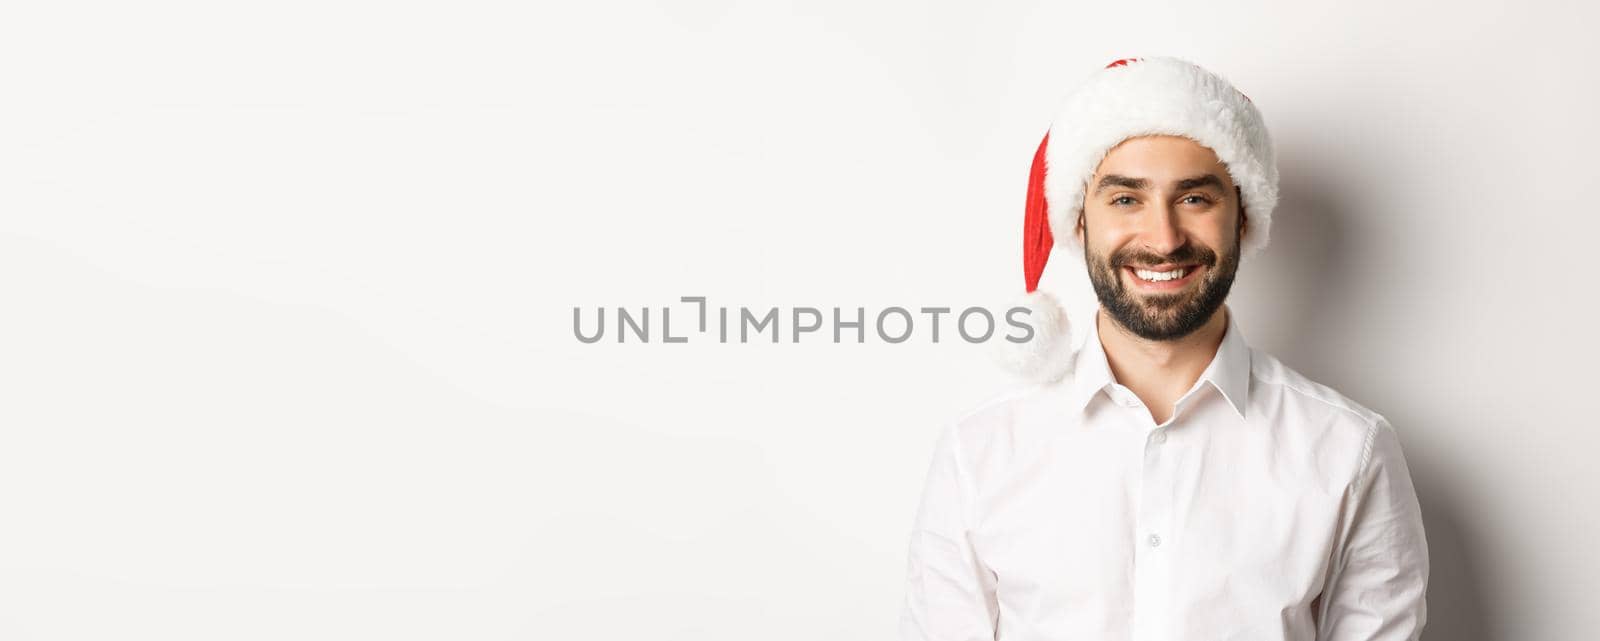 Close-up of happy bearded man celebrating christmas, wearing santa party hat and smiling, standing over white background.